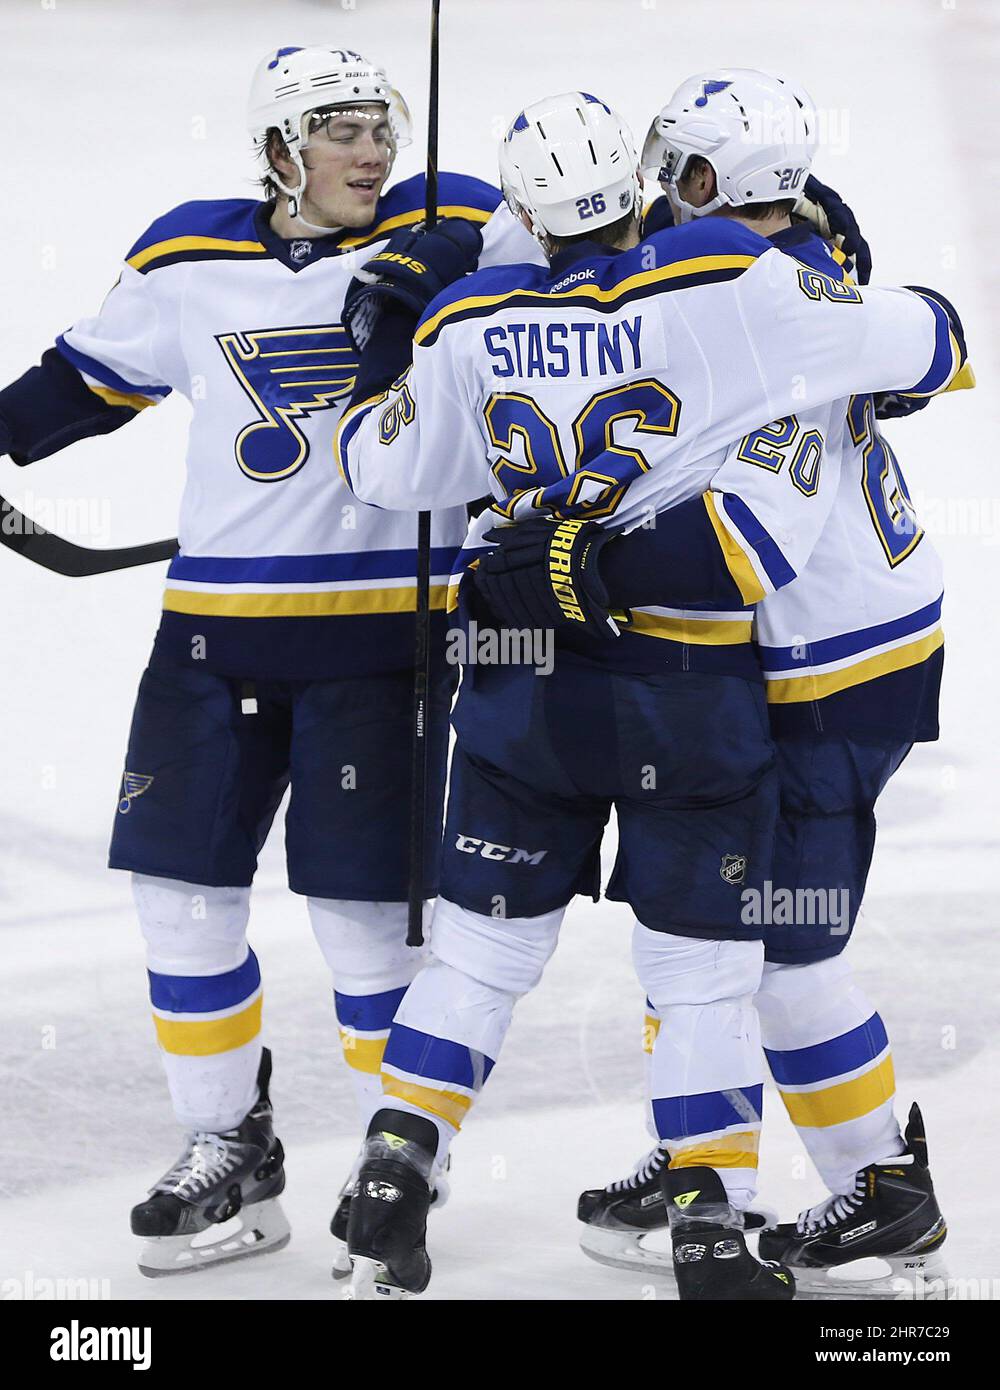 St. Louis Blues T.J. Oshie stretches during warmups, while wearing a  camouflage sweater before a game against the Toronto Maple Leafs in the  first period at the Scottrade Center in St. Louis on November 10, 2011. The  Blues wore the tops in honor of